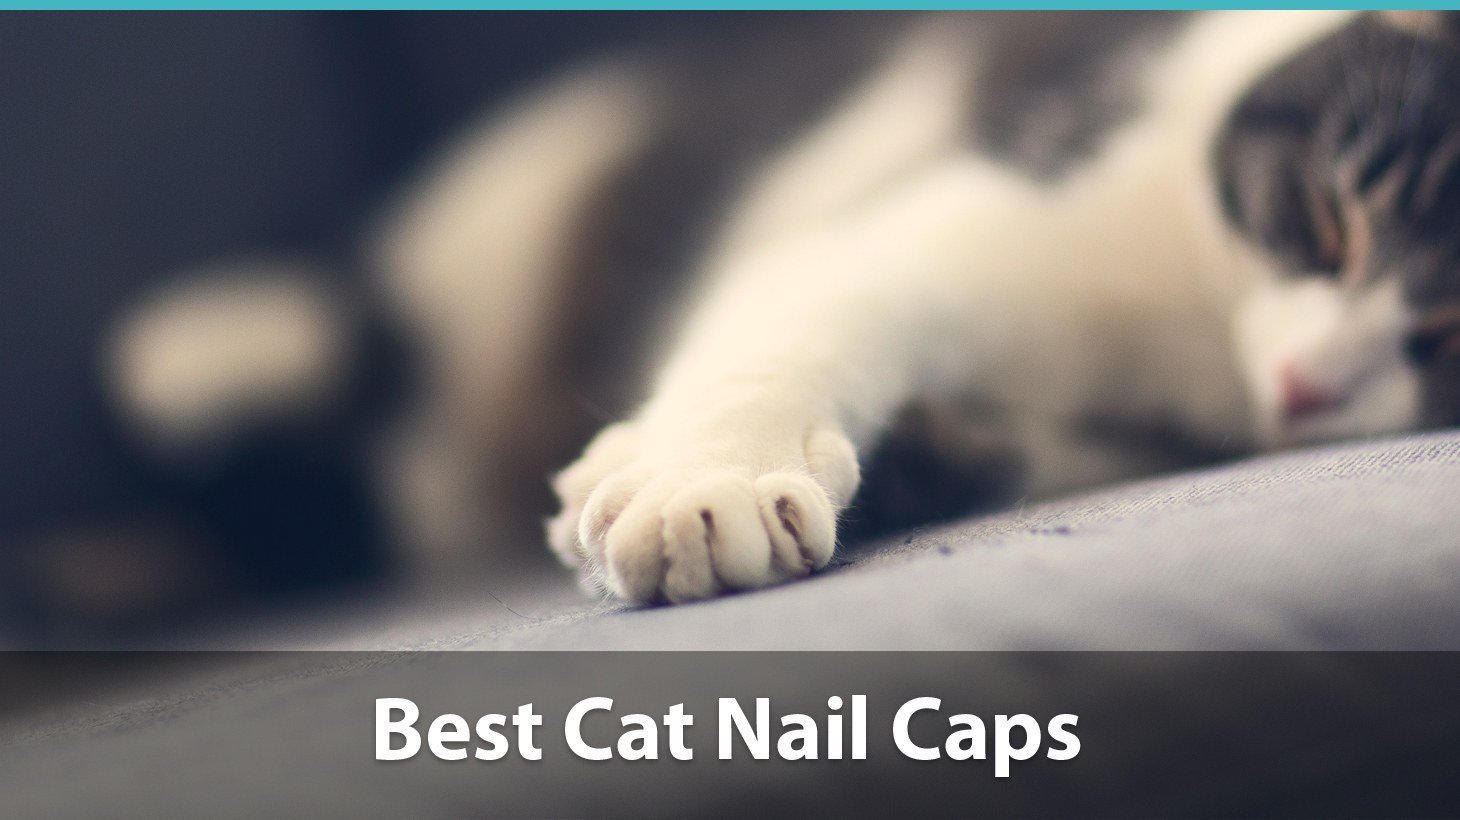 are claw caps bad for dogs